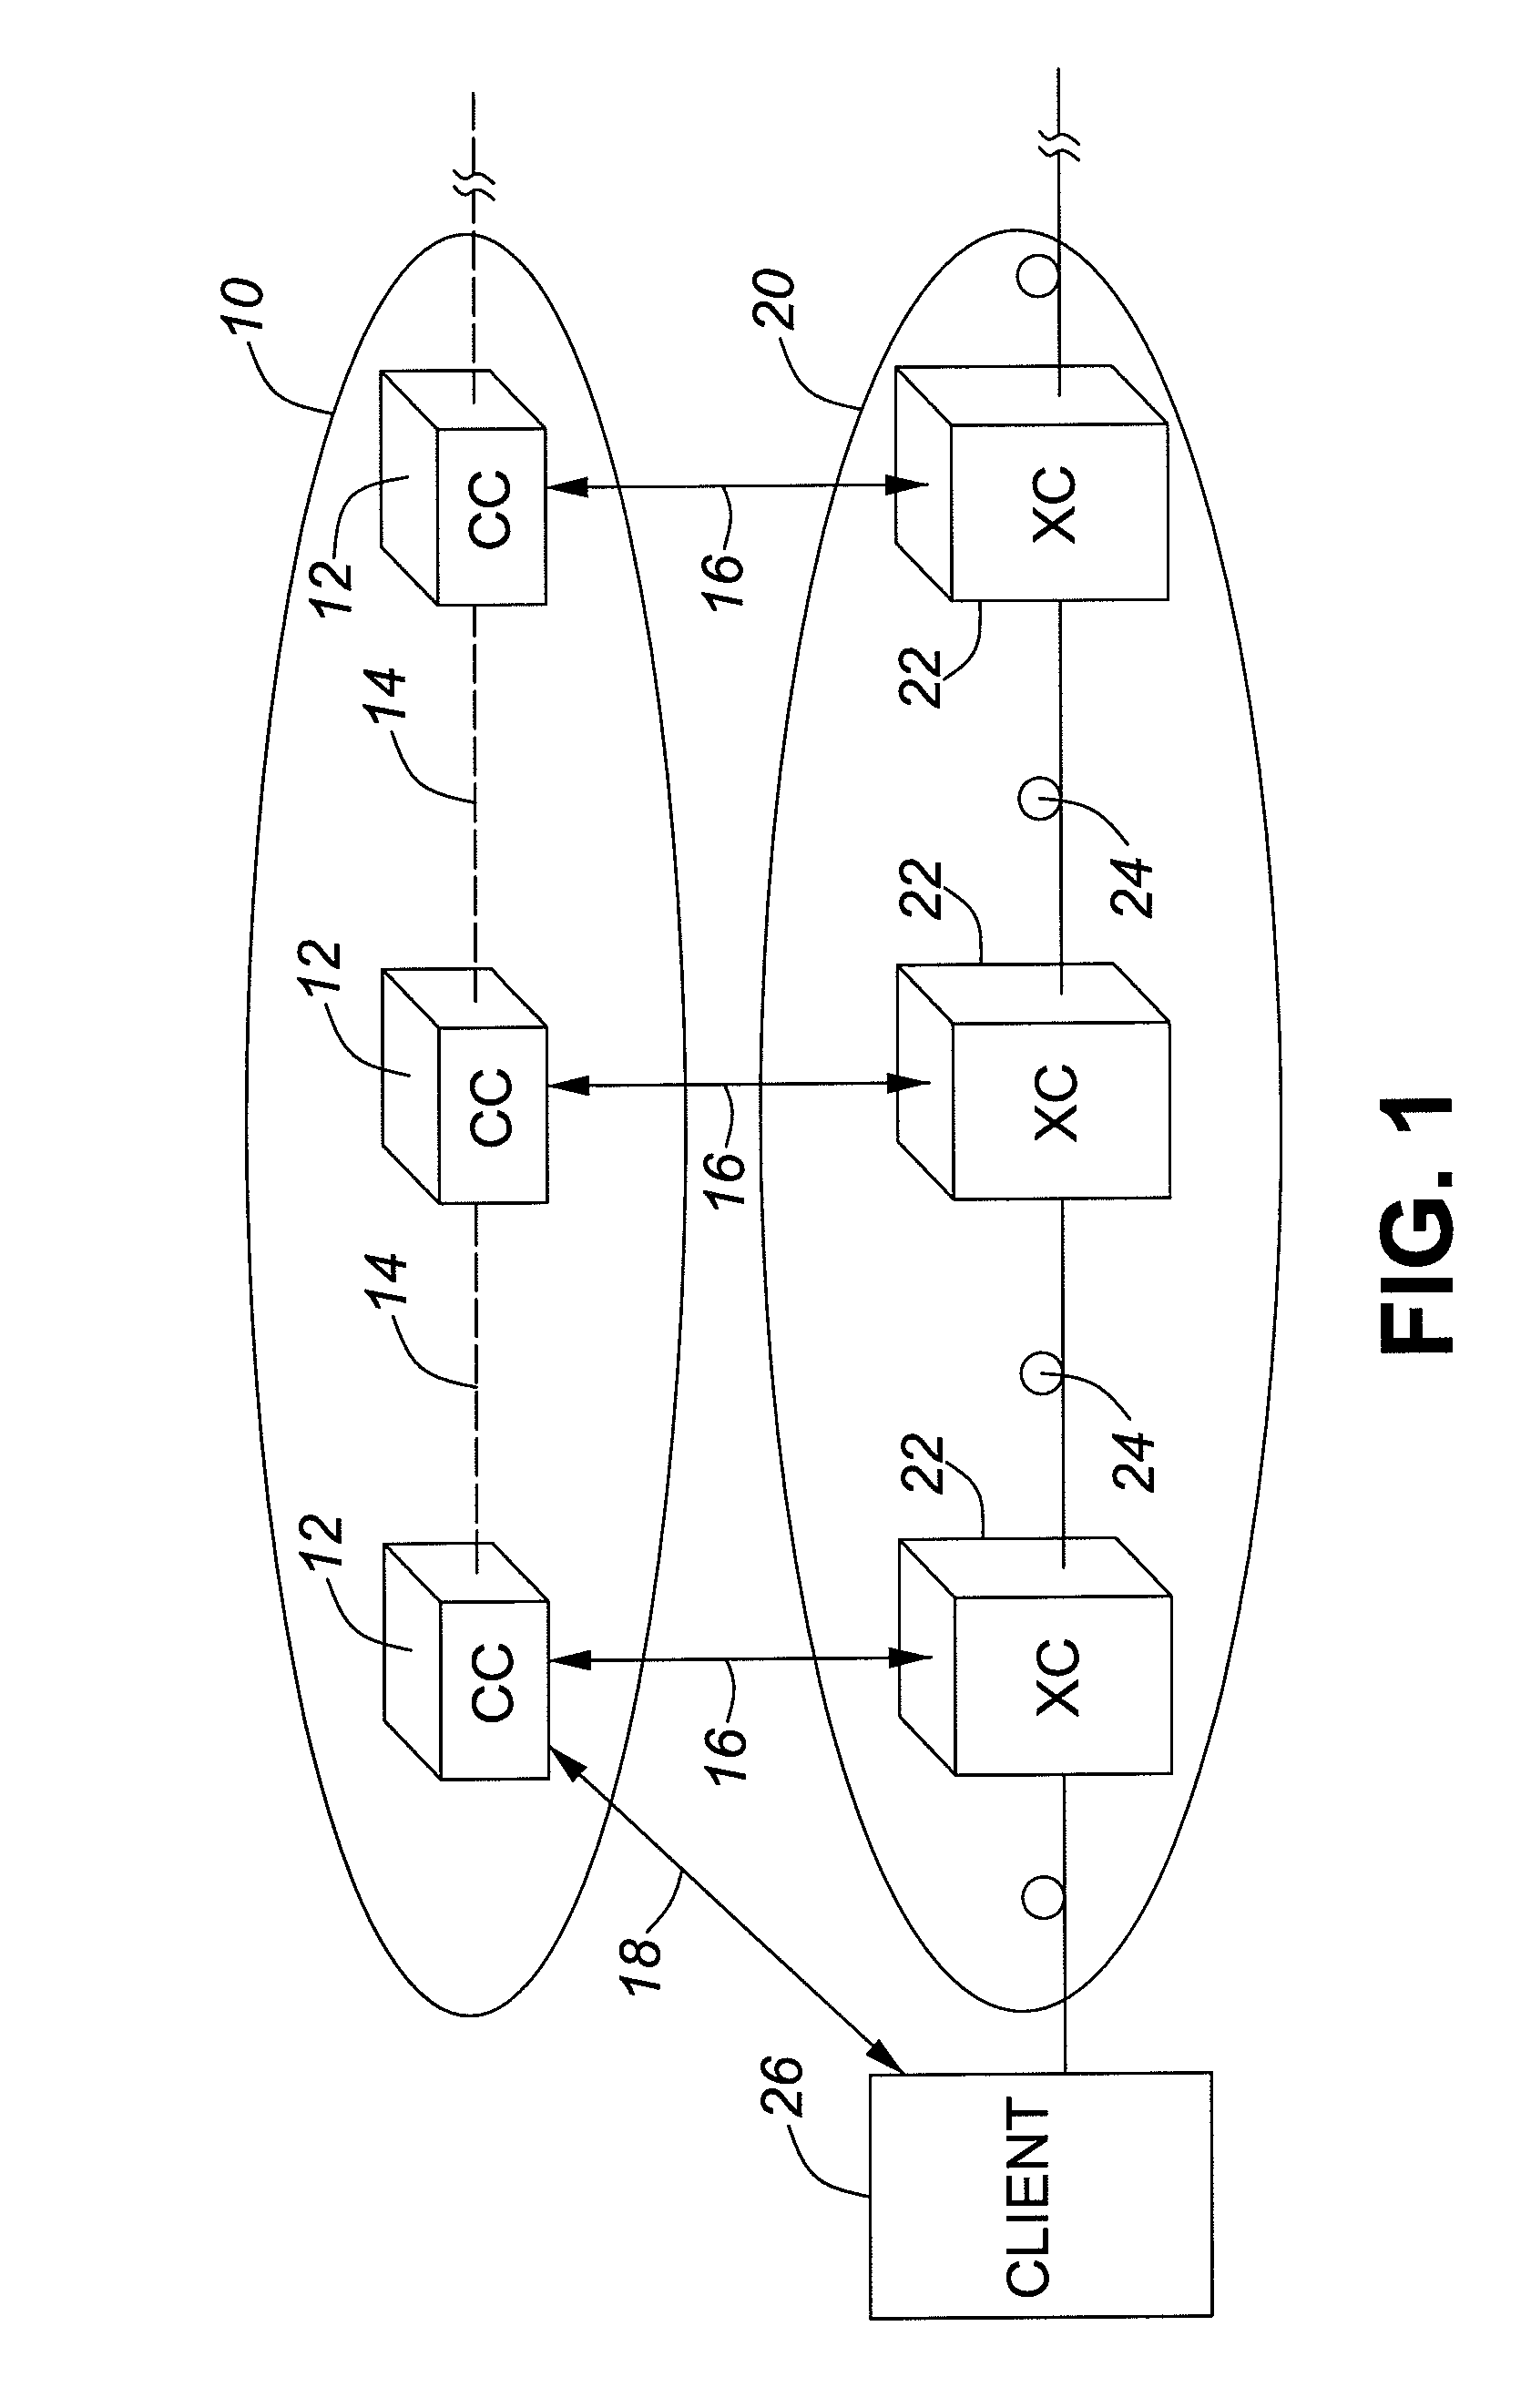 Method of and system for routing in a photonic network